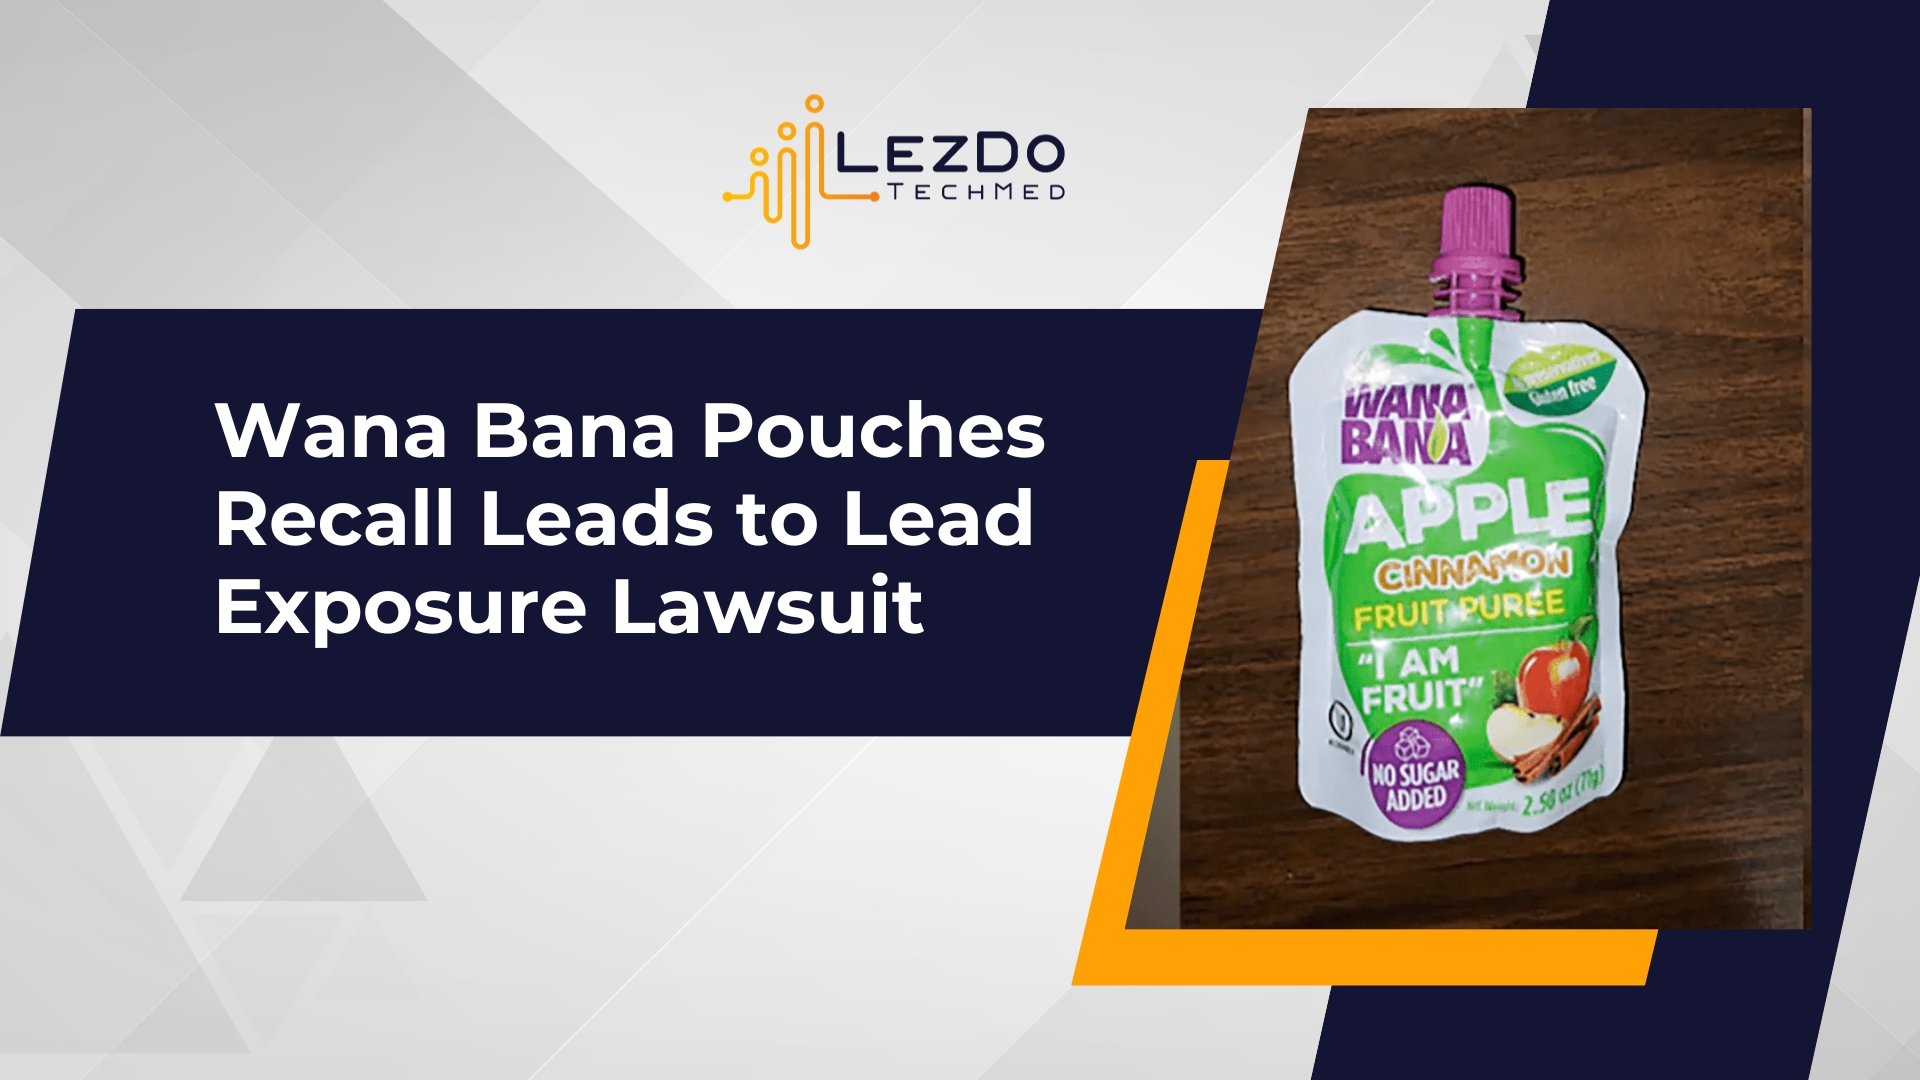 Wana Bana Pouches Recall Leads to Lead Exposure Lawsuit